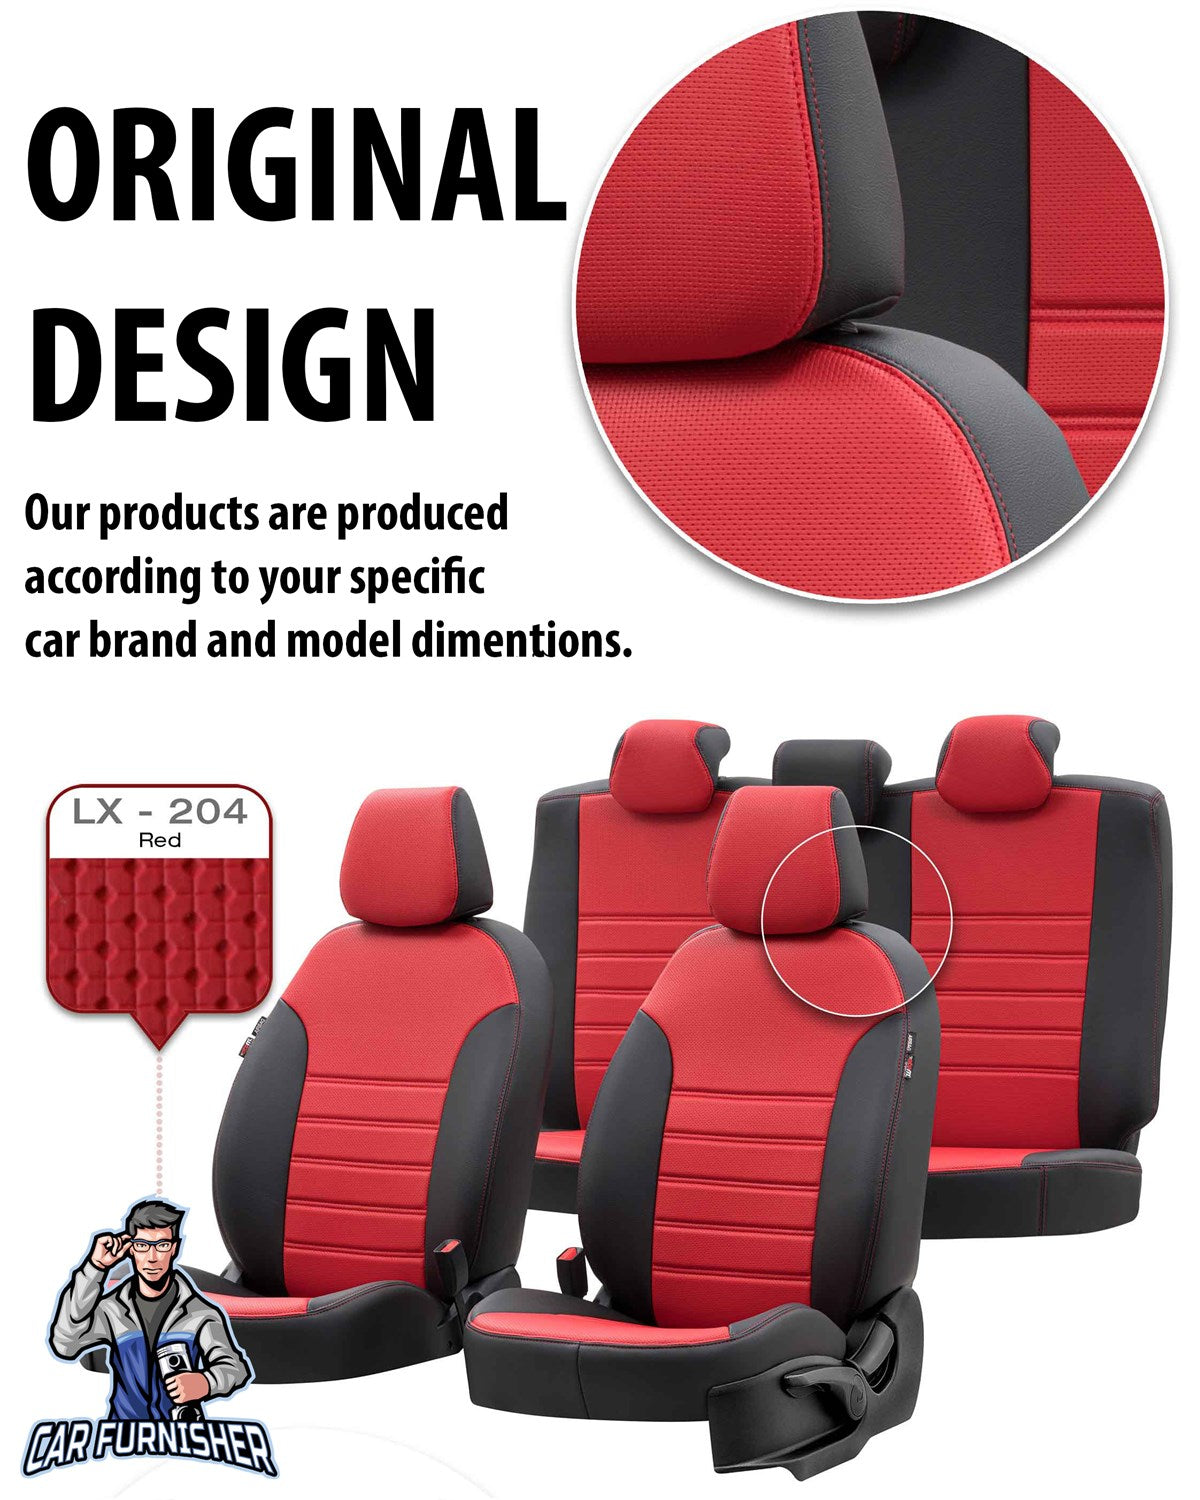 Volkswagen Passat Seat Cover New York Leather Design Smoked Leather